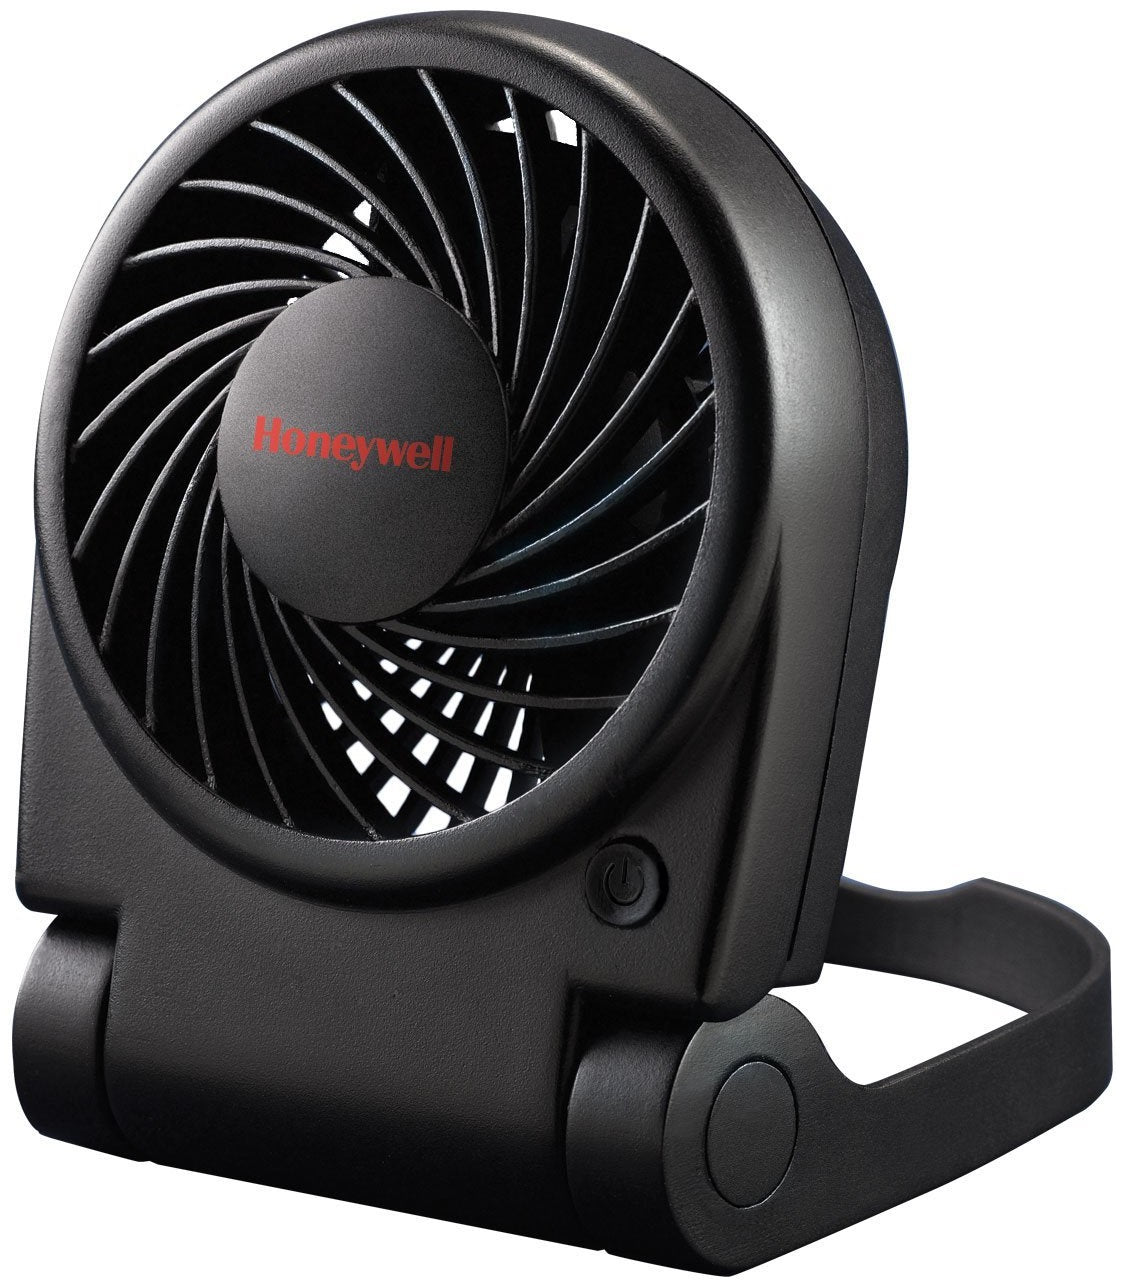 Buy honeywell htf090b turbo - Online store for venting & fans, battery operated fans in USA, on sale, low price, discount deals, coupon code